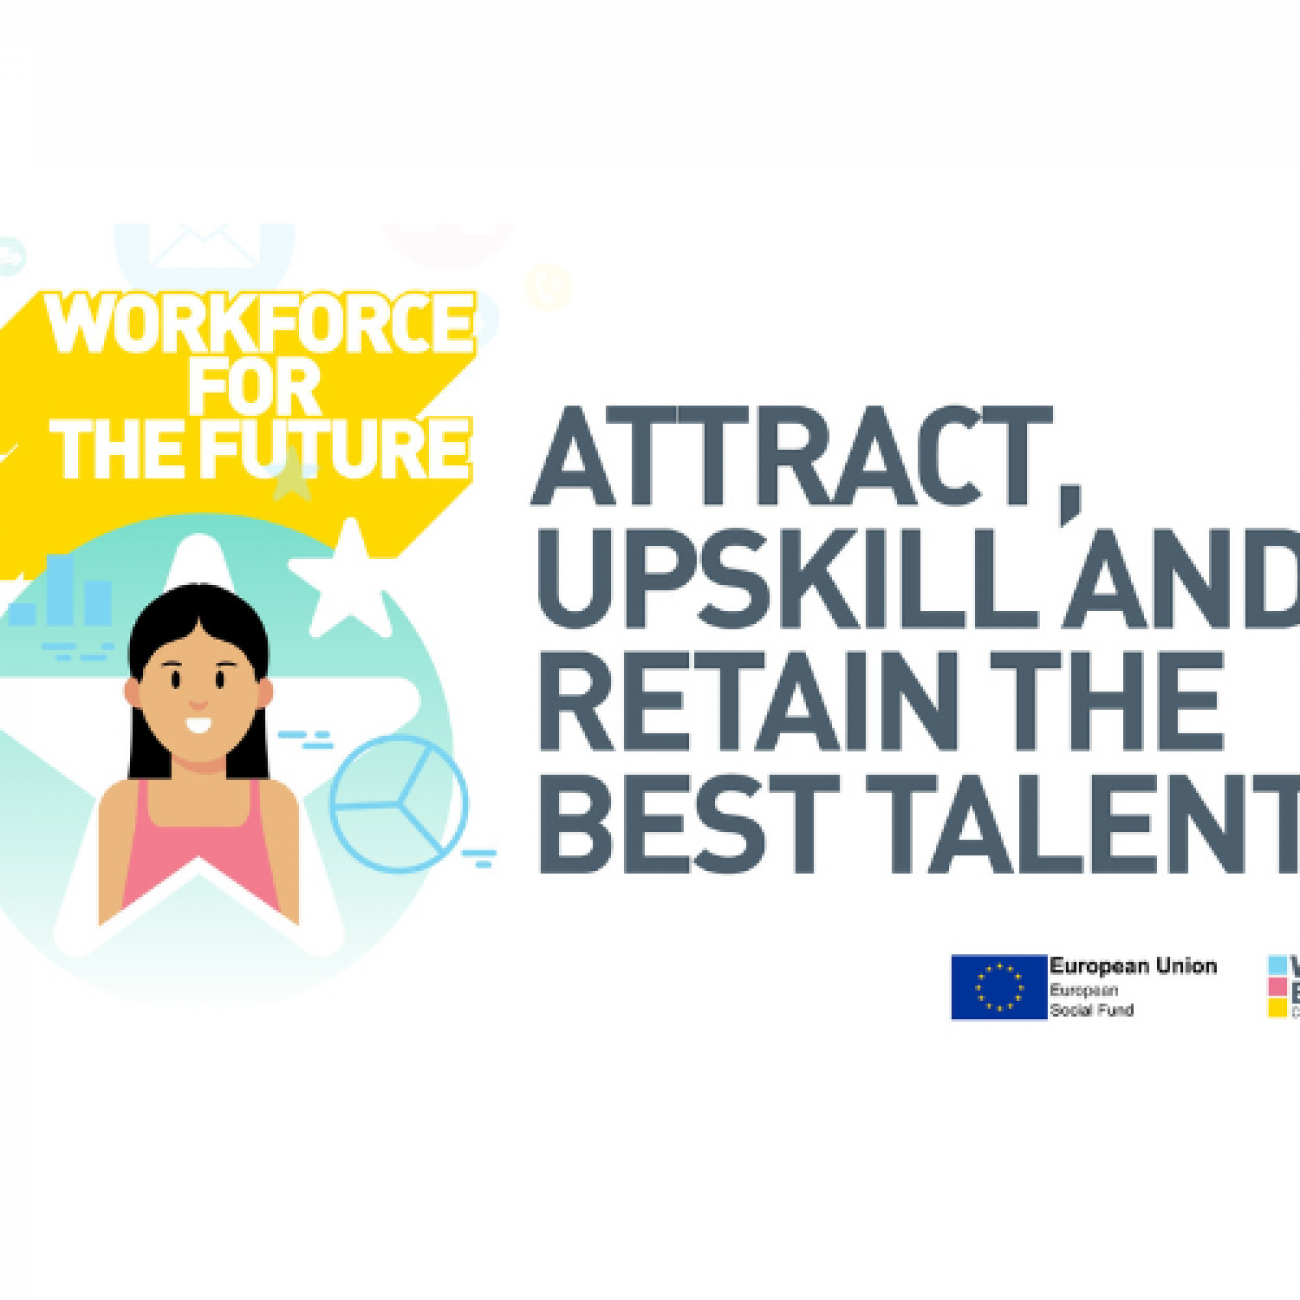 Workforce for the future, Attract, Upskill and Retain the Best Talent